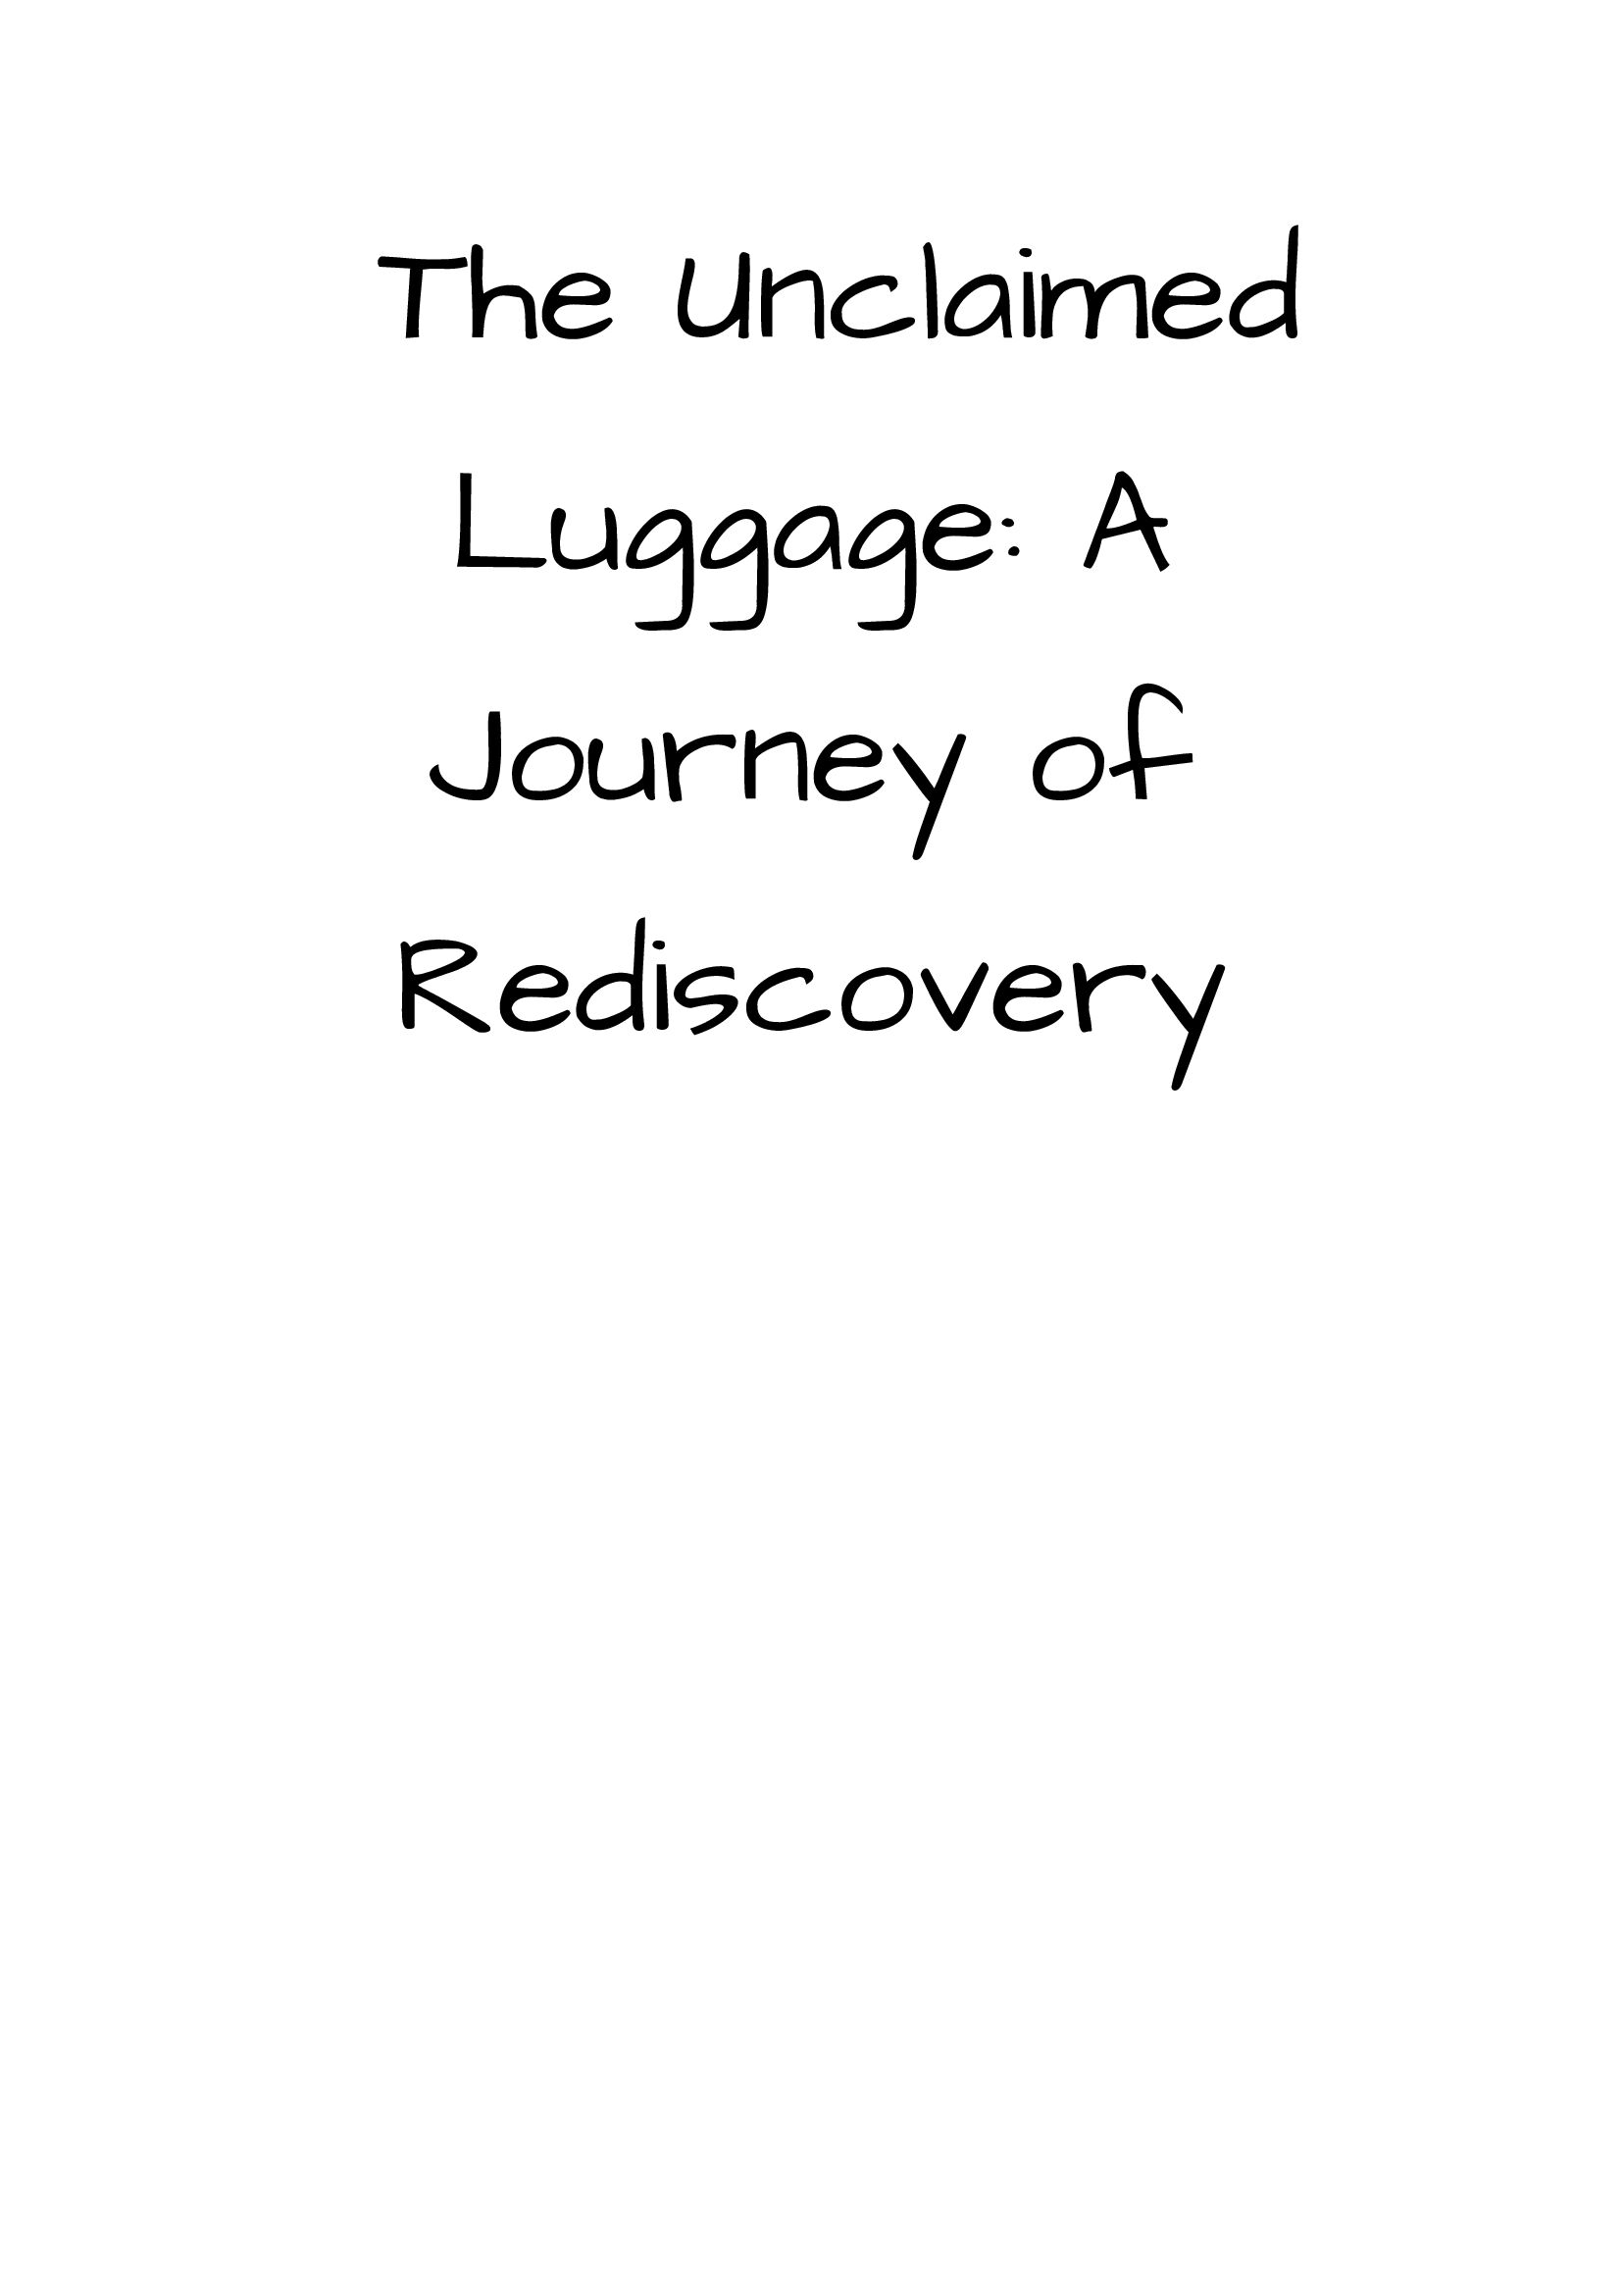 The Unclaimed Luggage: A Journey of Rediscovery